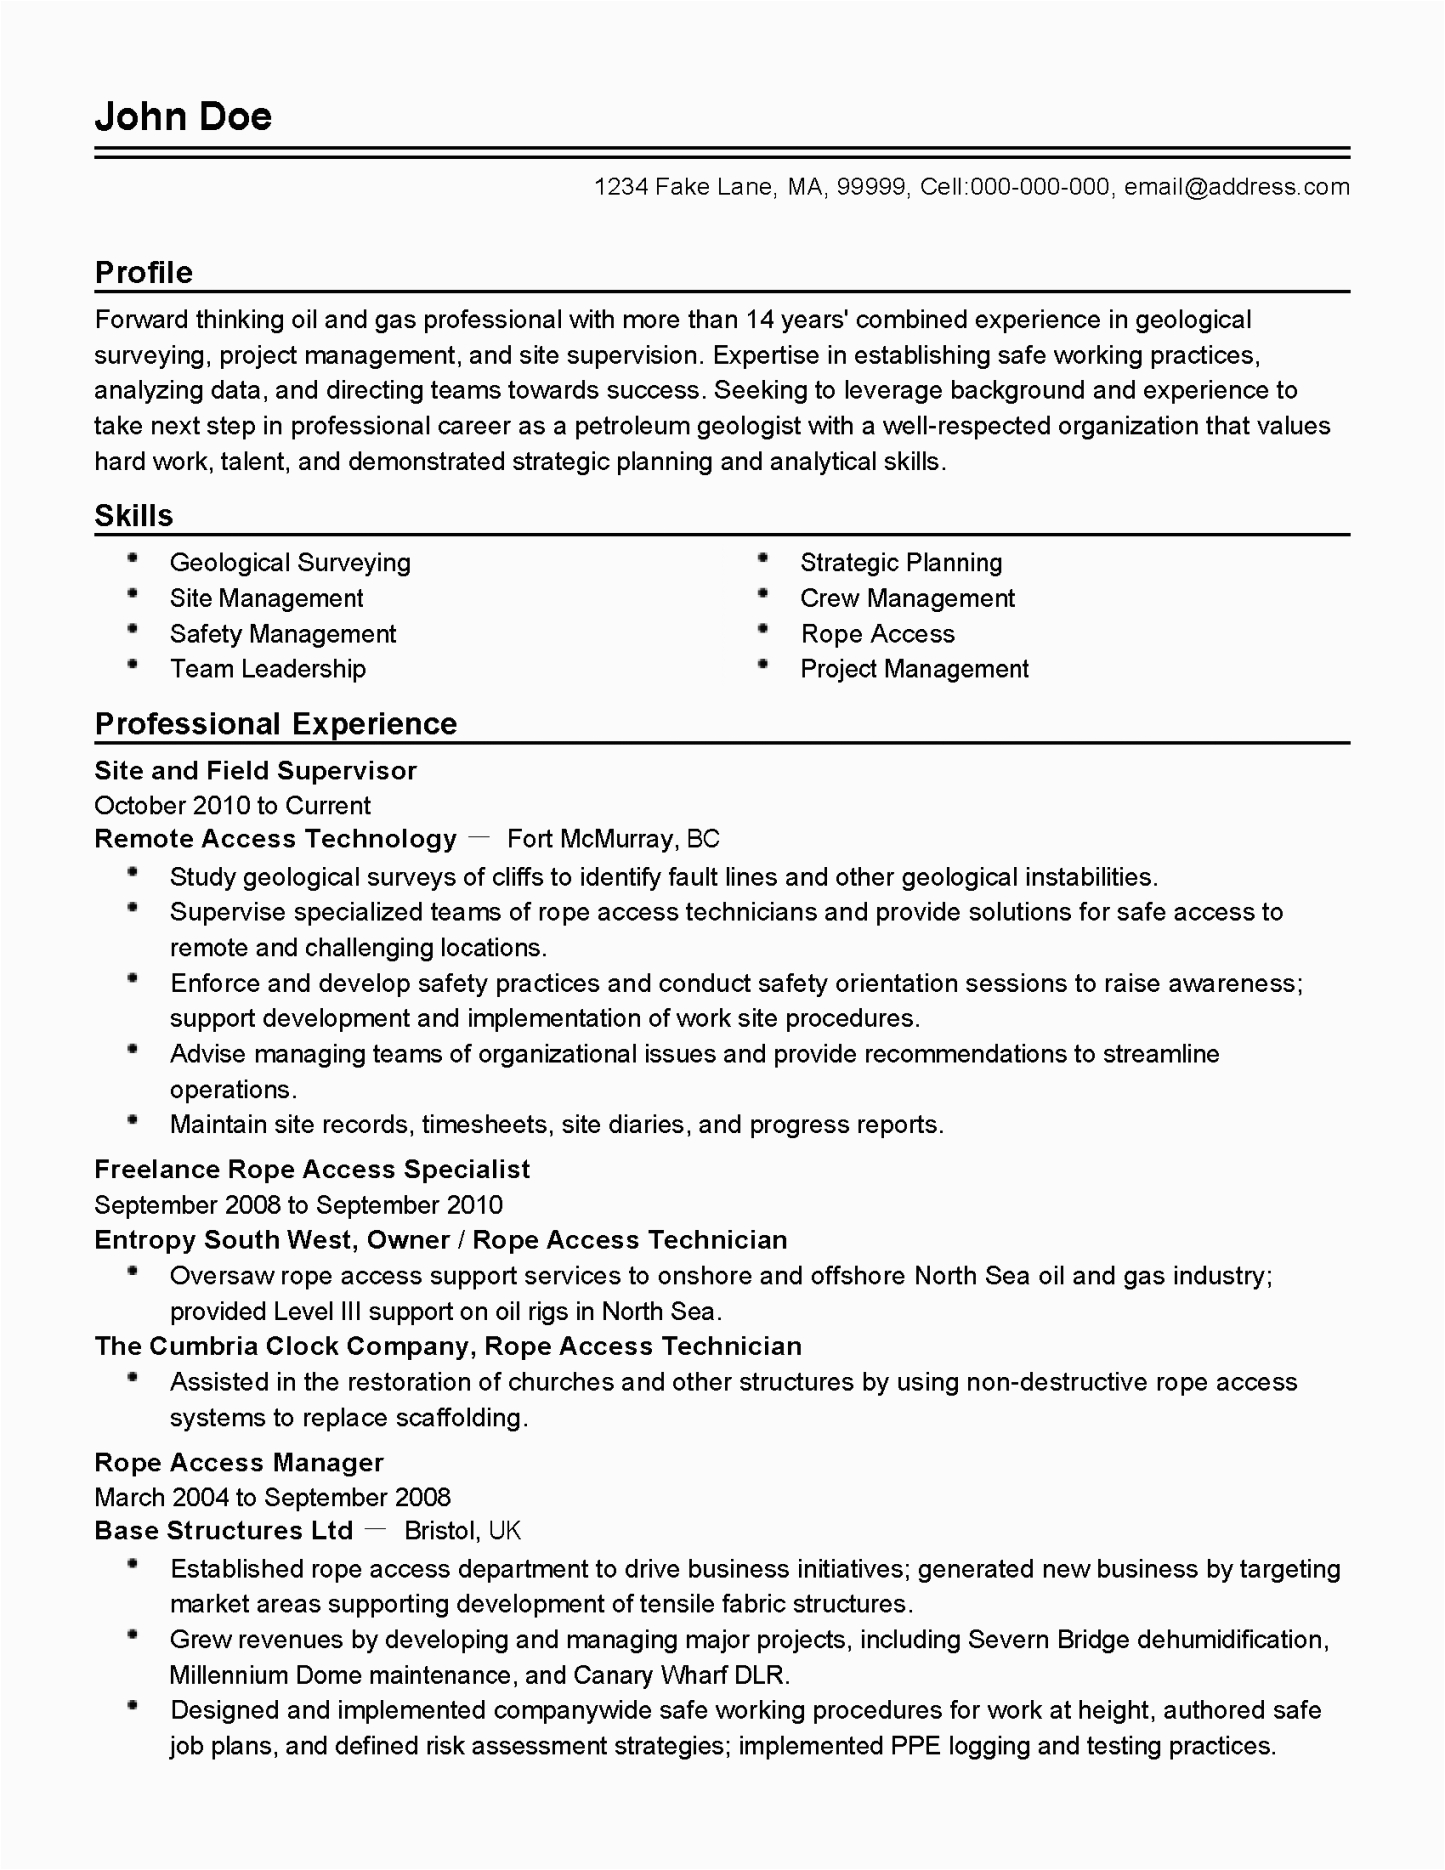 Oil and Gas Consultant Resume Sample Oil and Gas Resume Examples